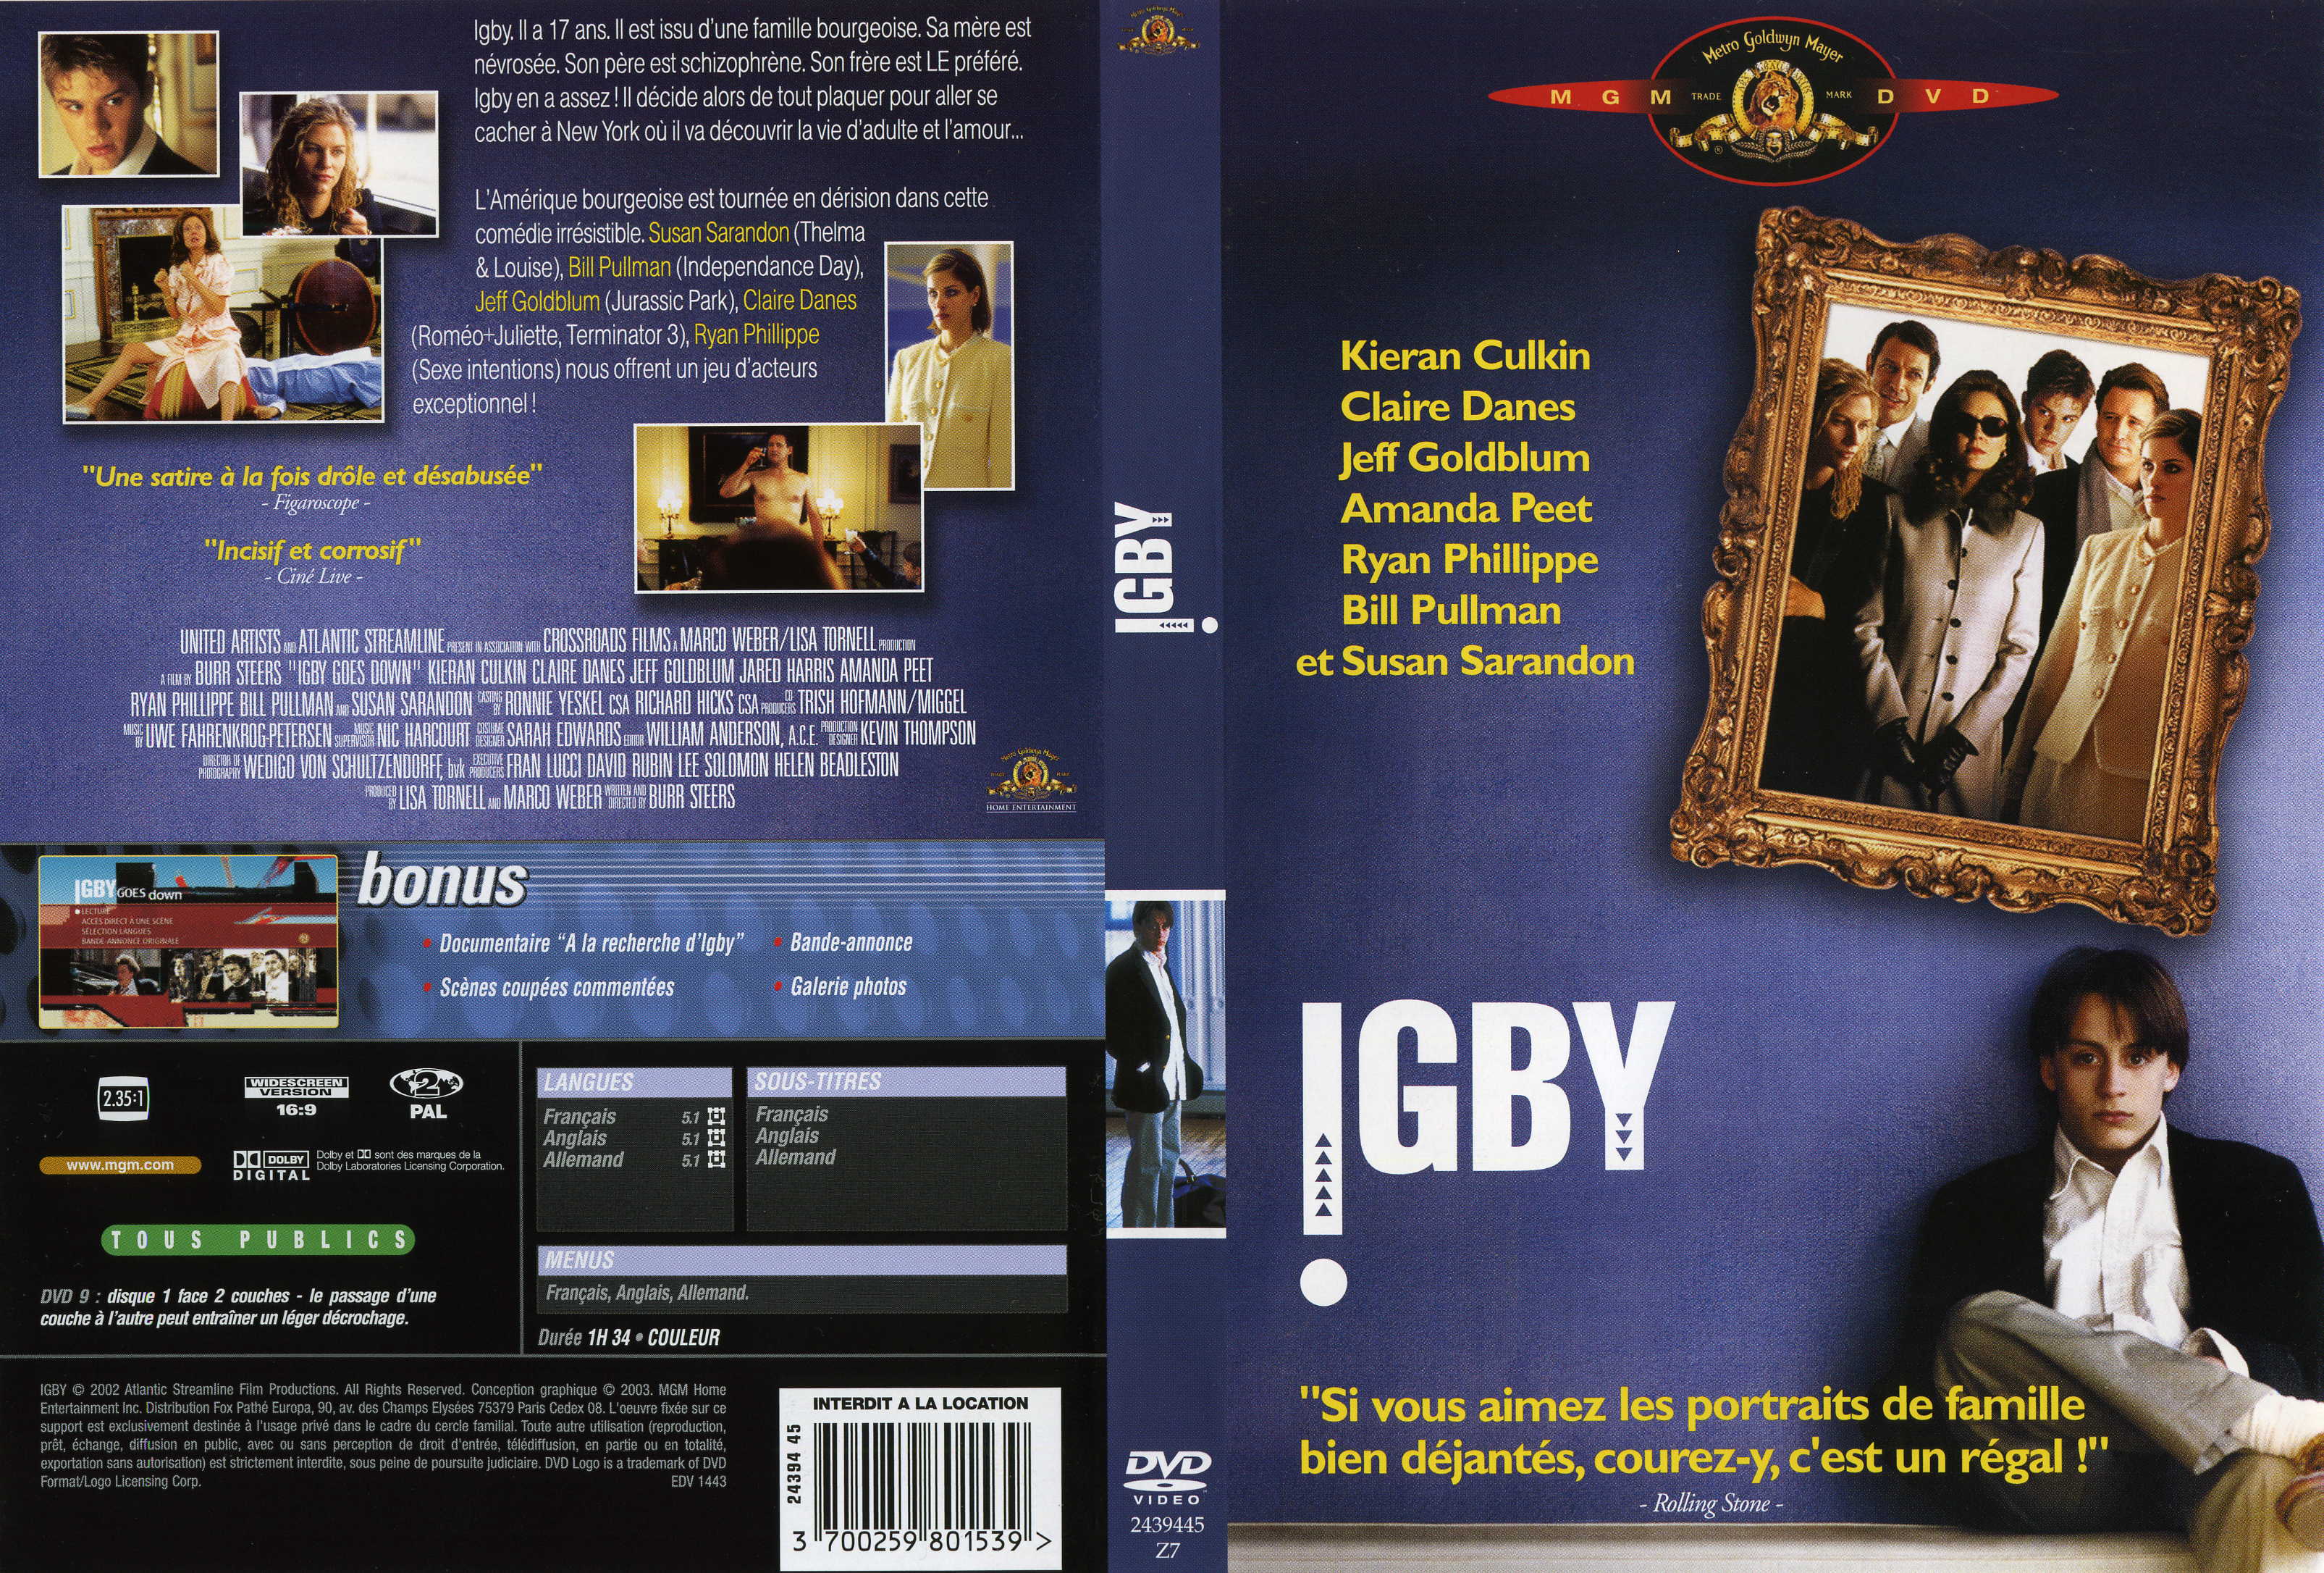 Jaquette DVD Igby